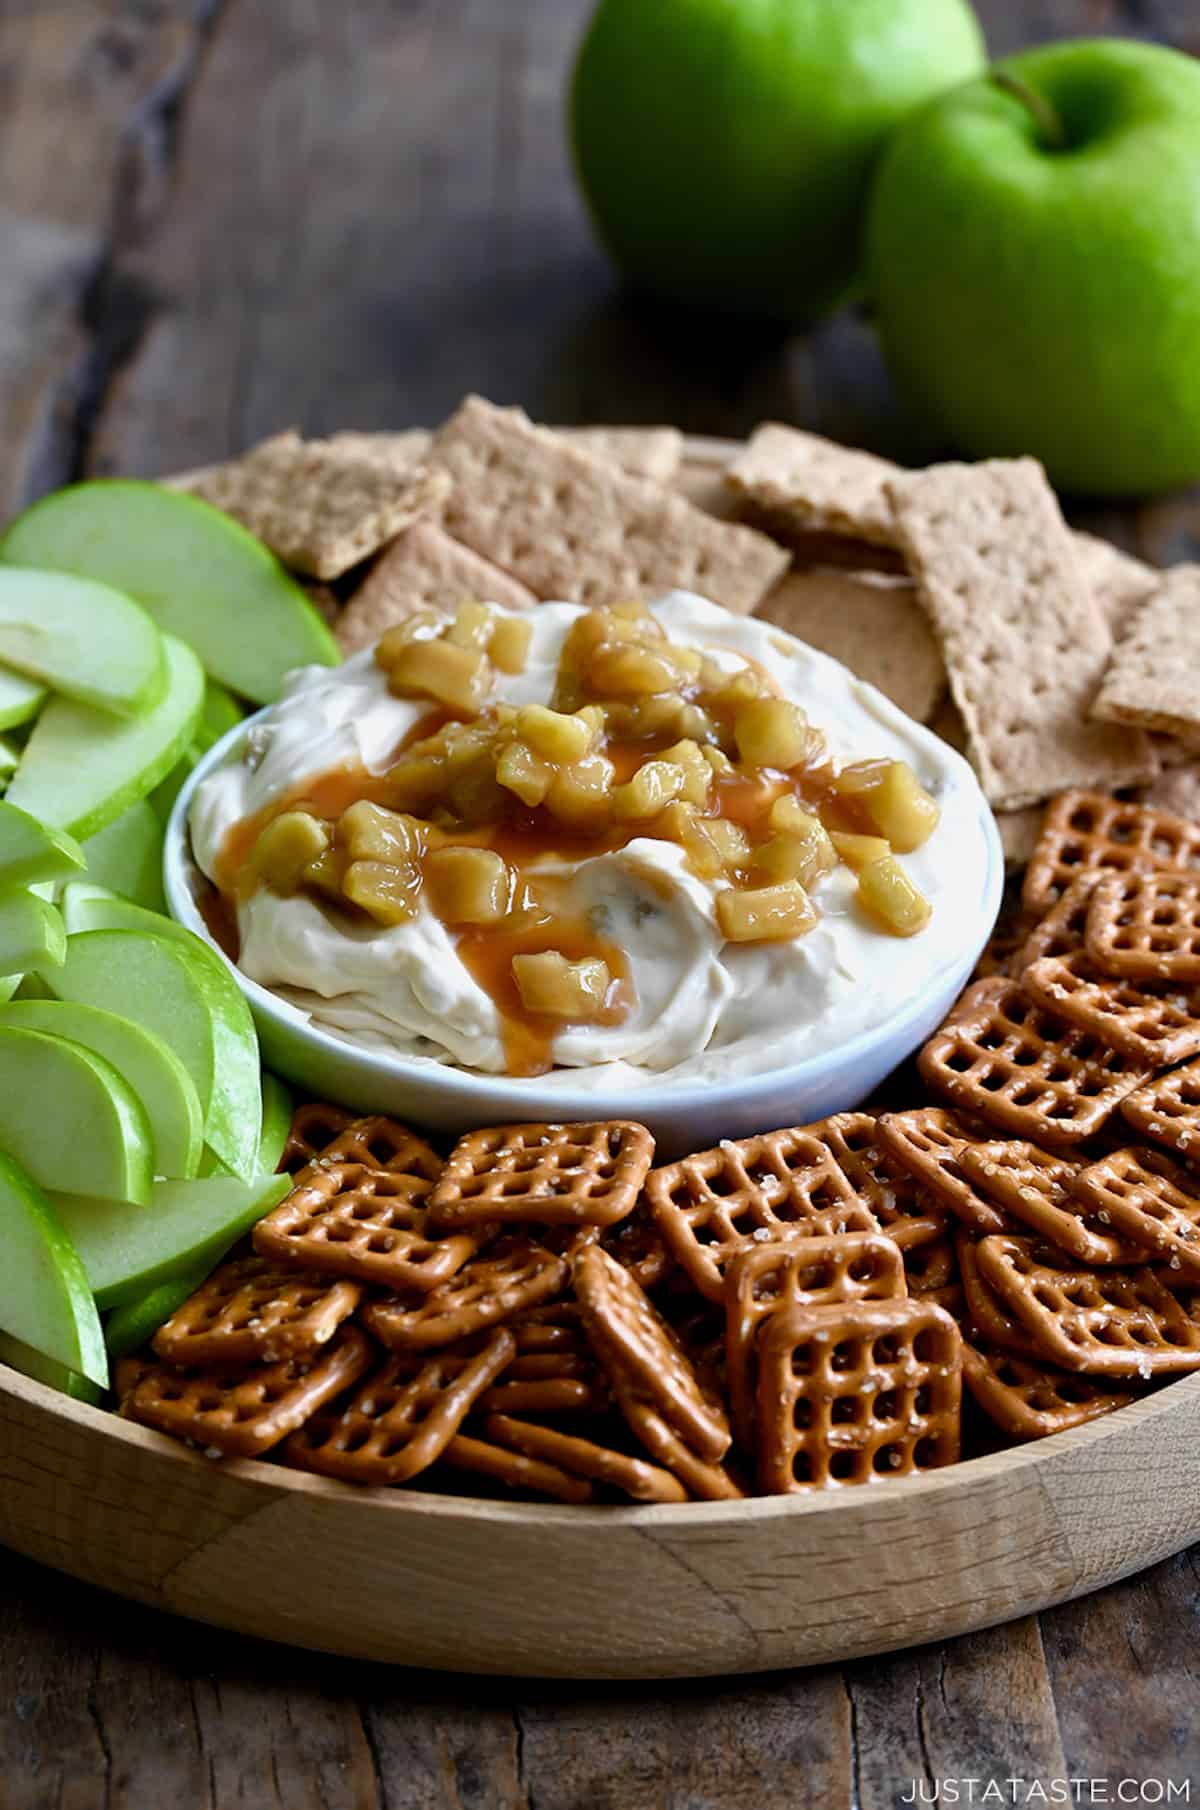 A bowl of cheesecake dip topped with caramel apples surrounded by pretzels, sliced apples and graham crackers. Two green apples are in the background.